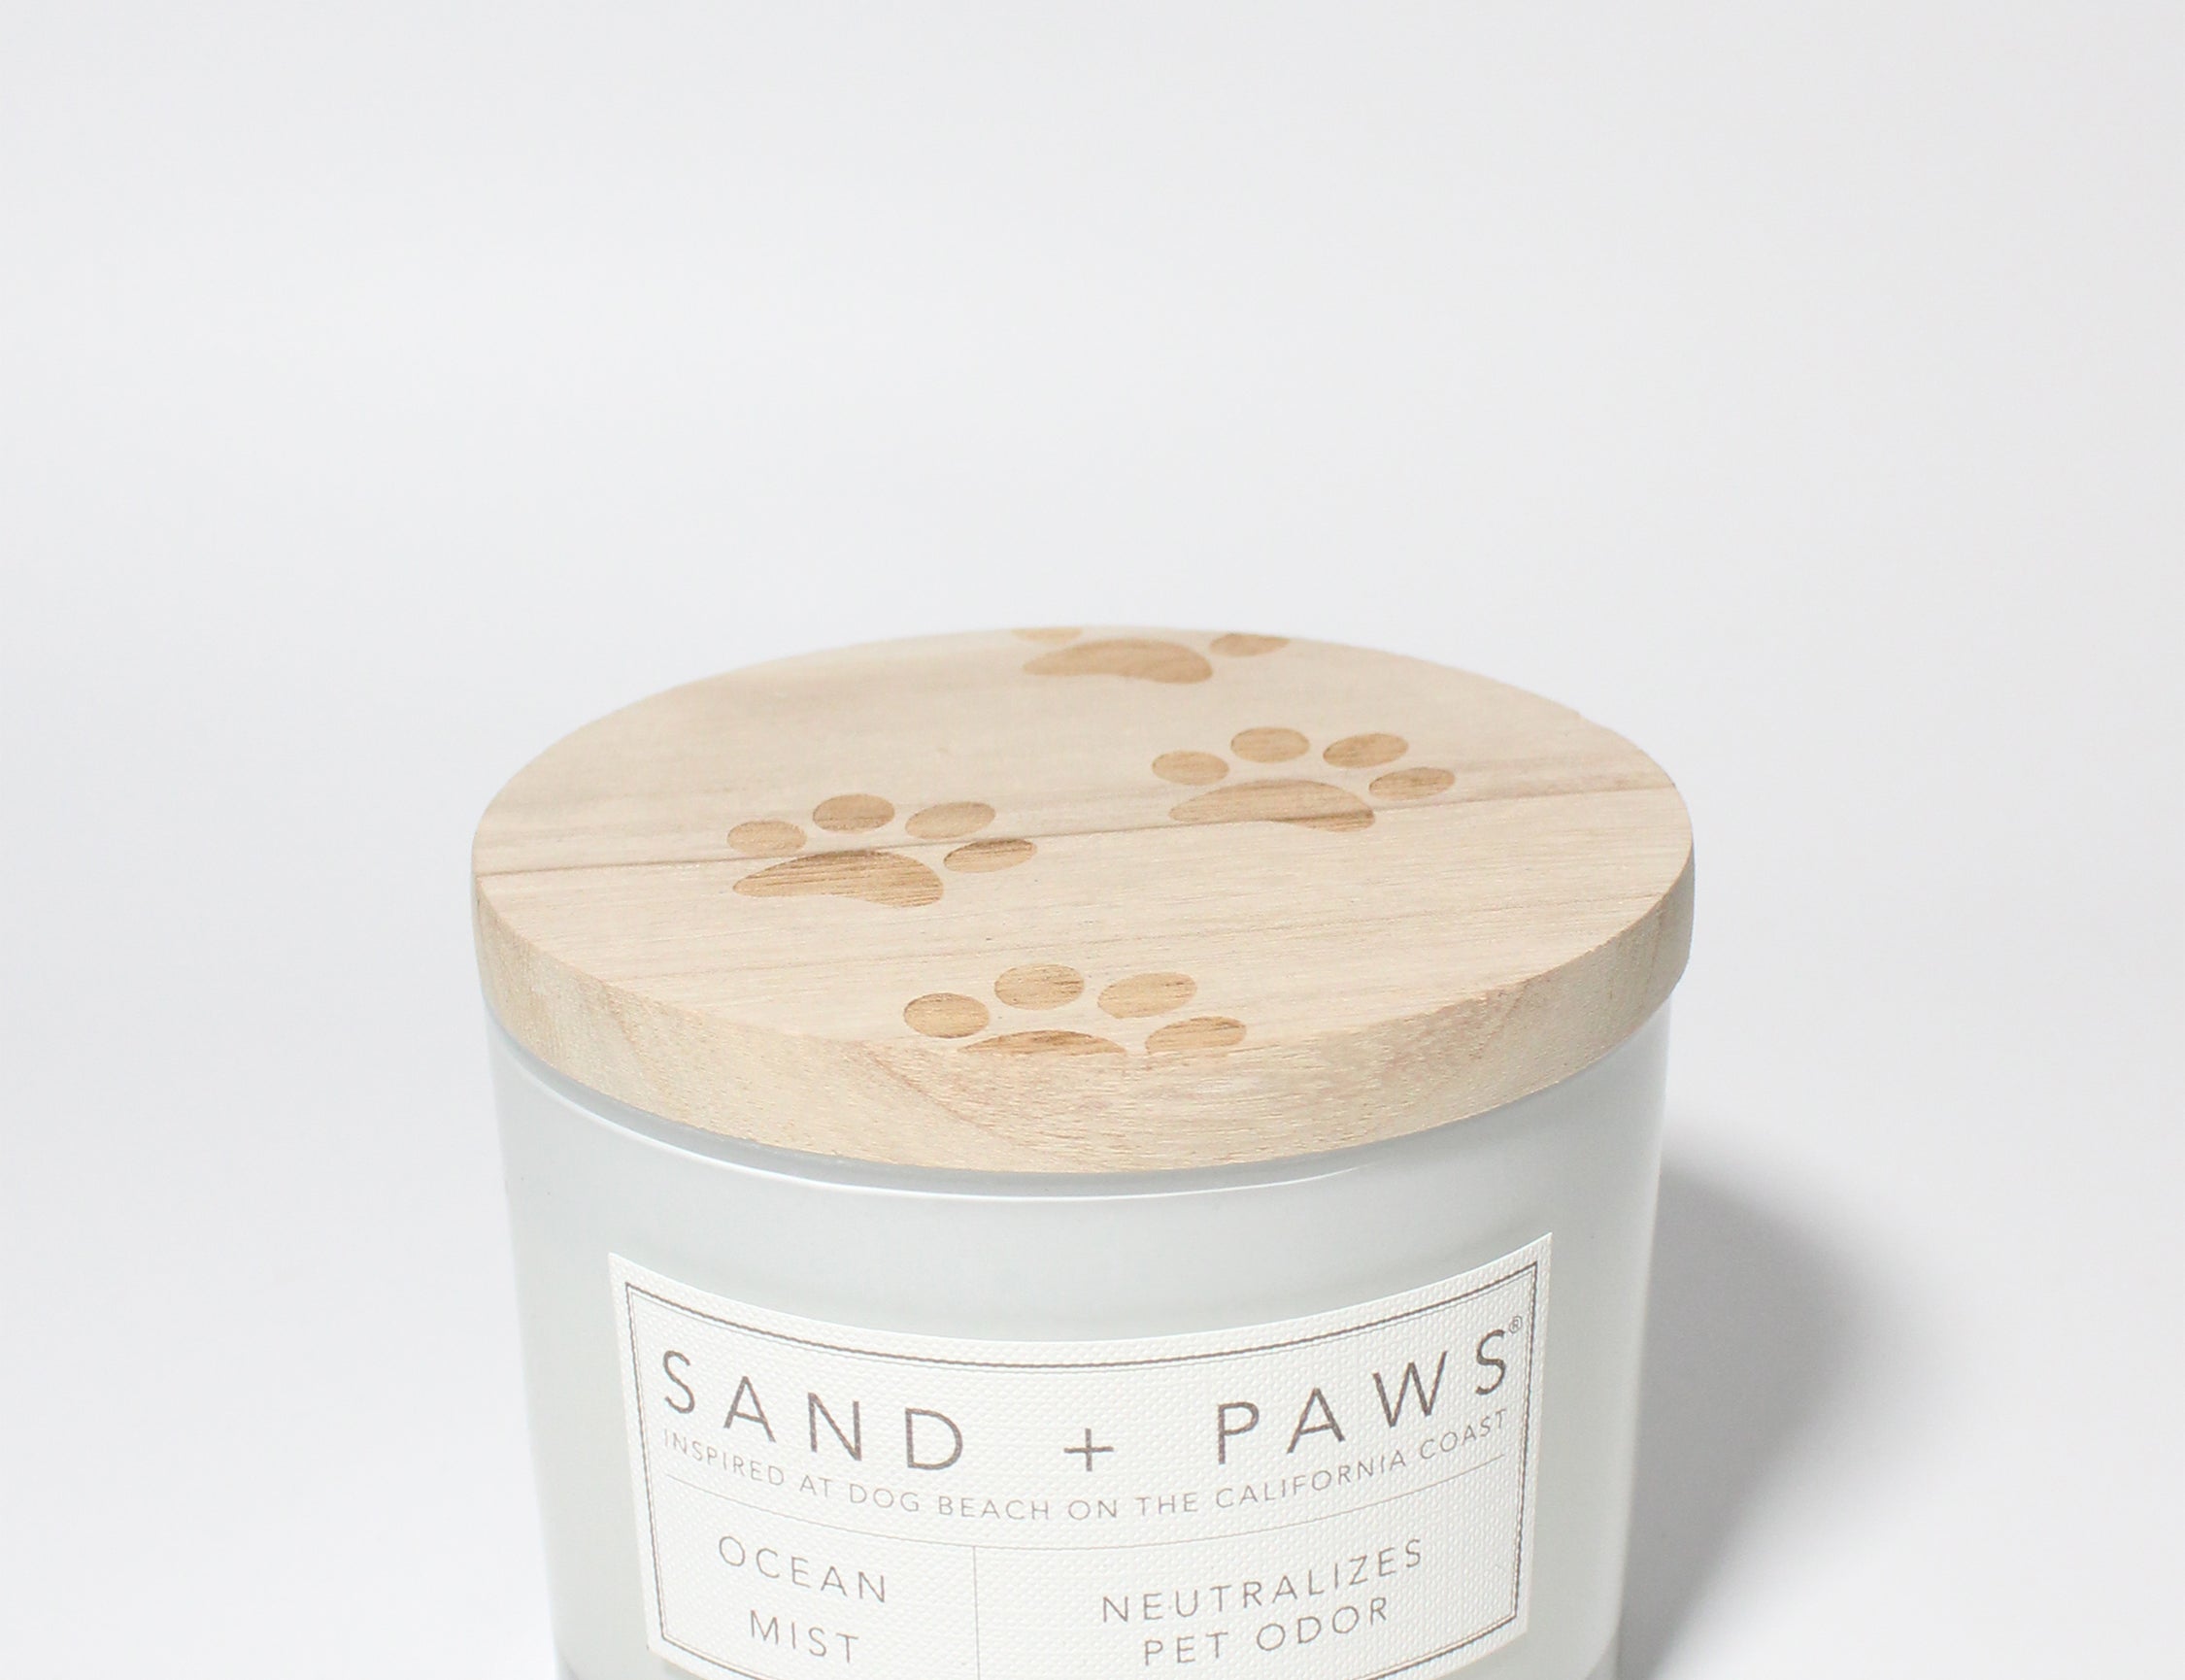  Sand + Paws Scented Candle - Ocean & Sea Salt –Luxurious Air  Freshening Jar Candles Neutralize pet Odors and Enhance Home décor – 100%  Cotton Lead-Free Wicks - 12 oz : Pet Supplies